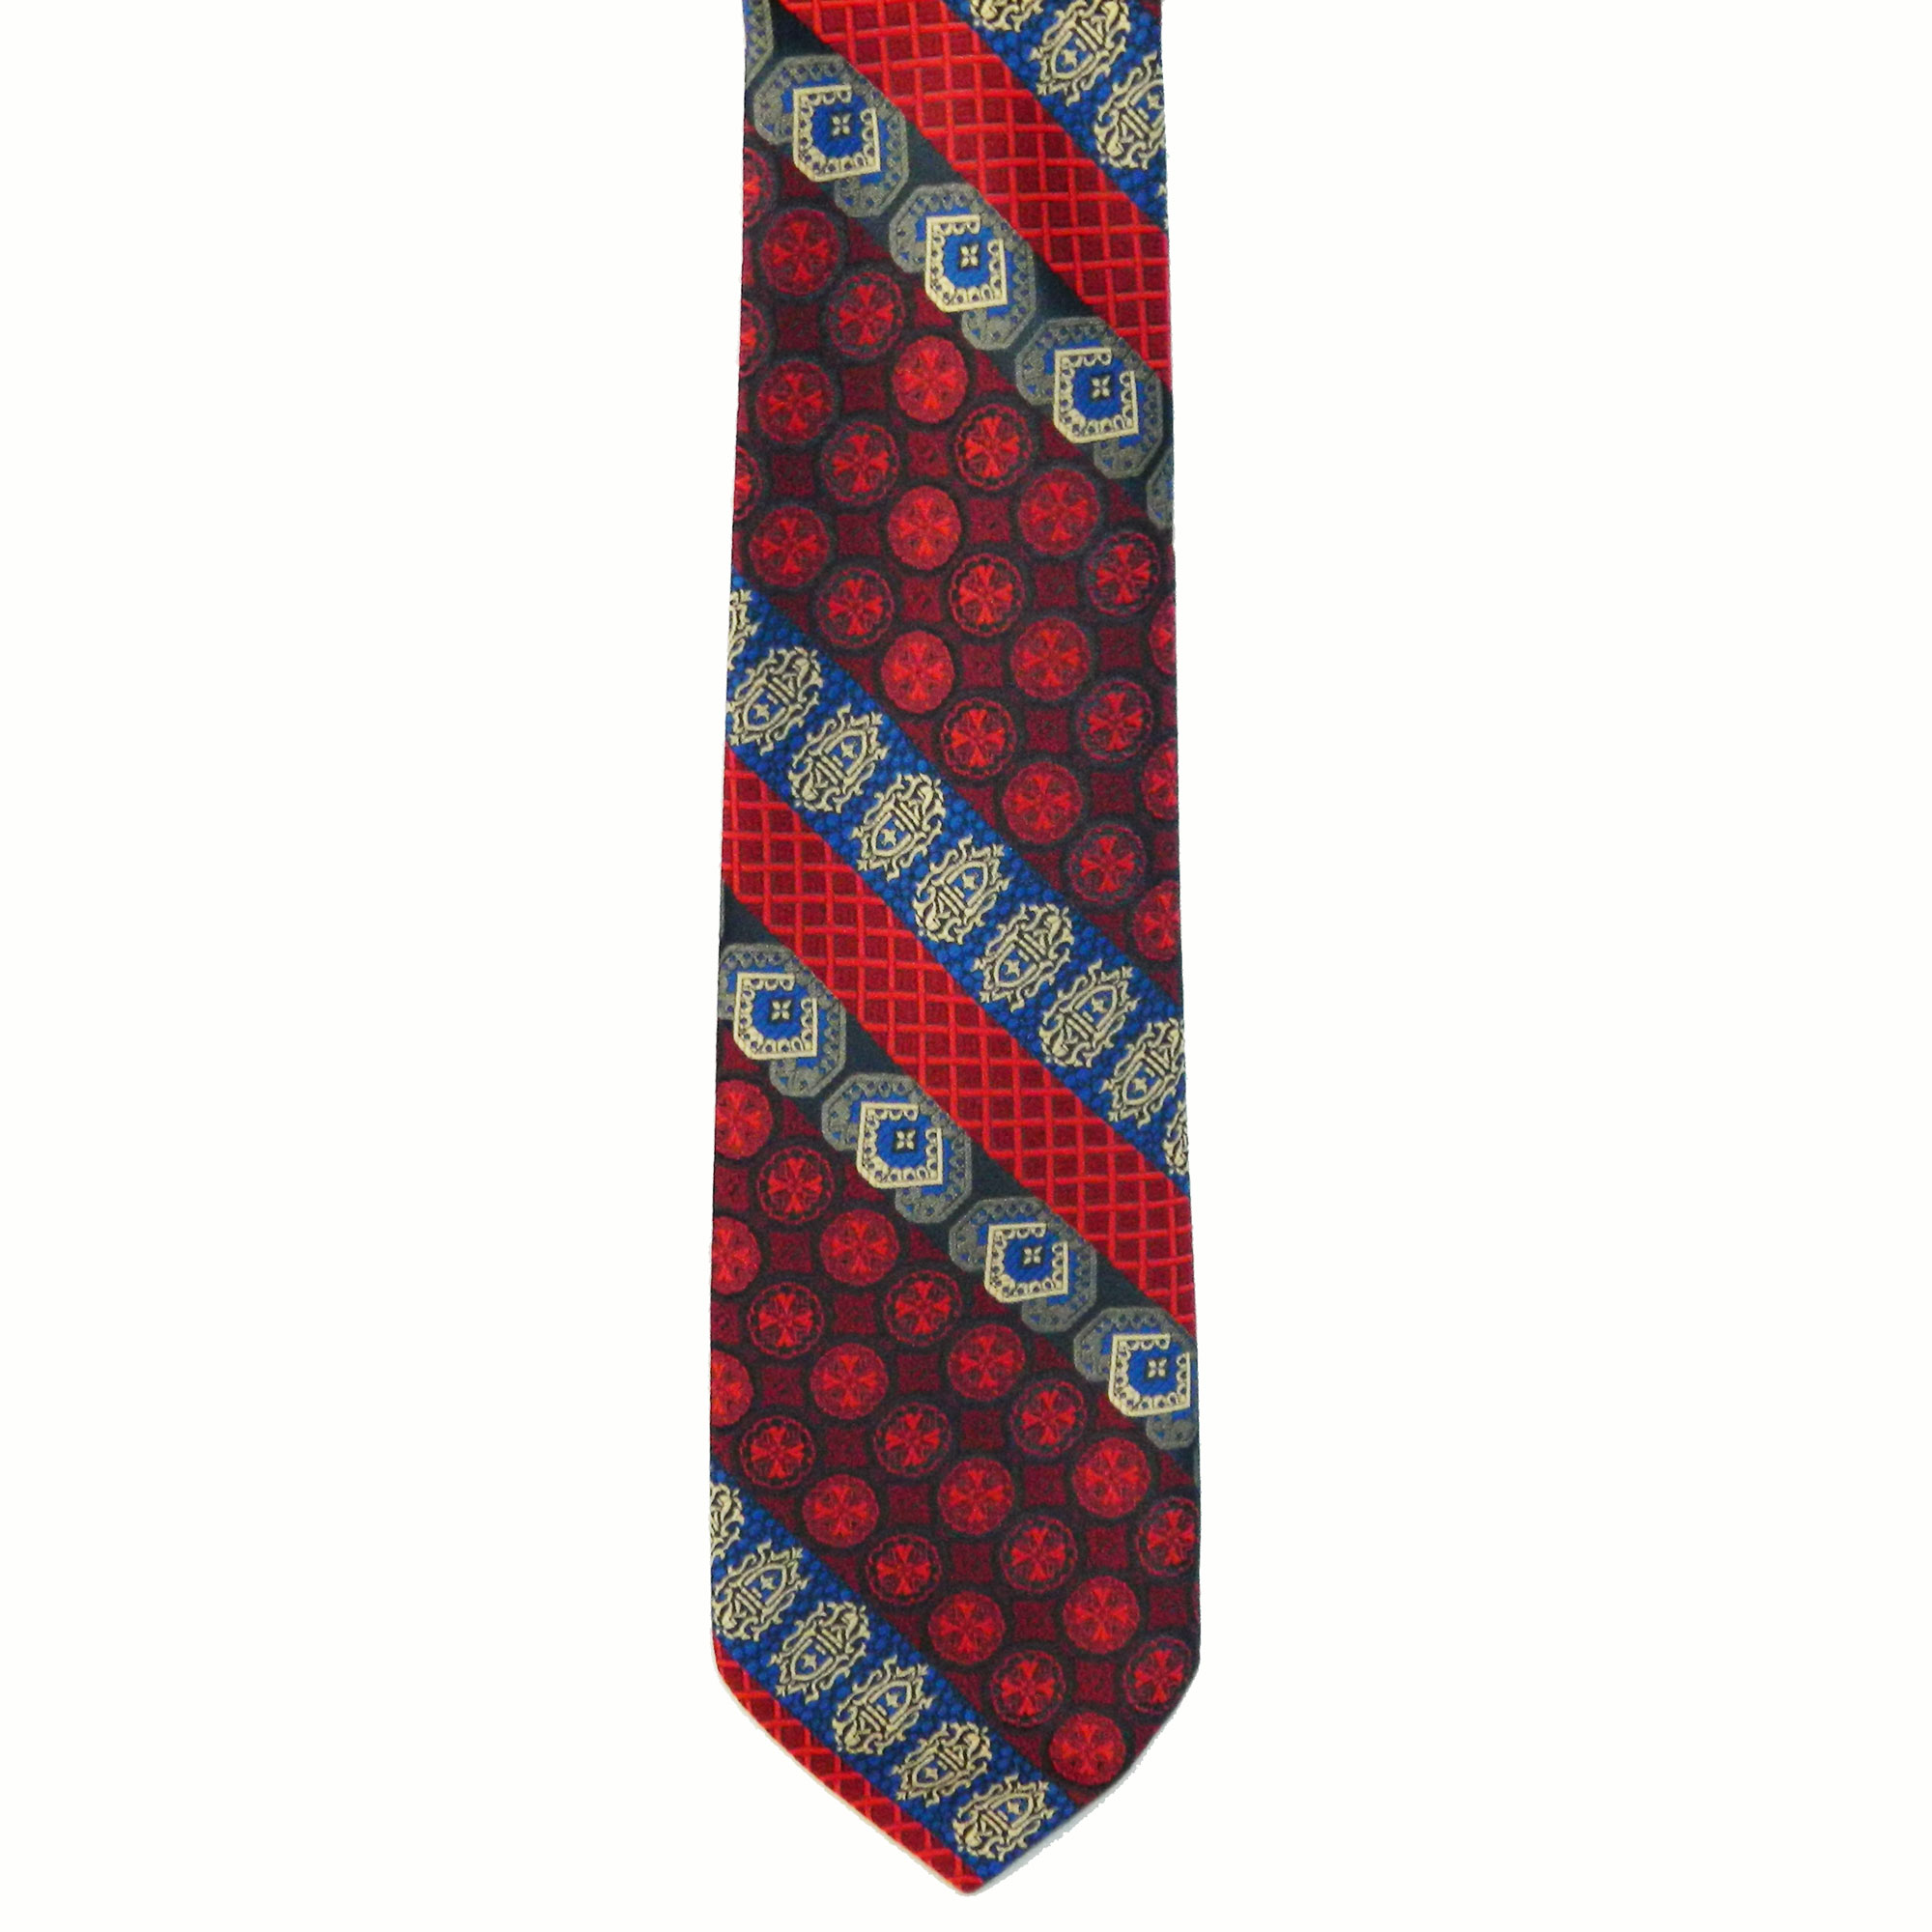 1970s red white and blue tie